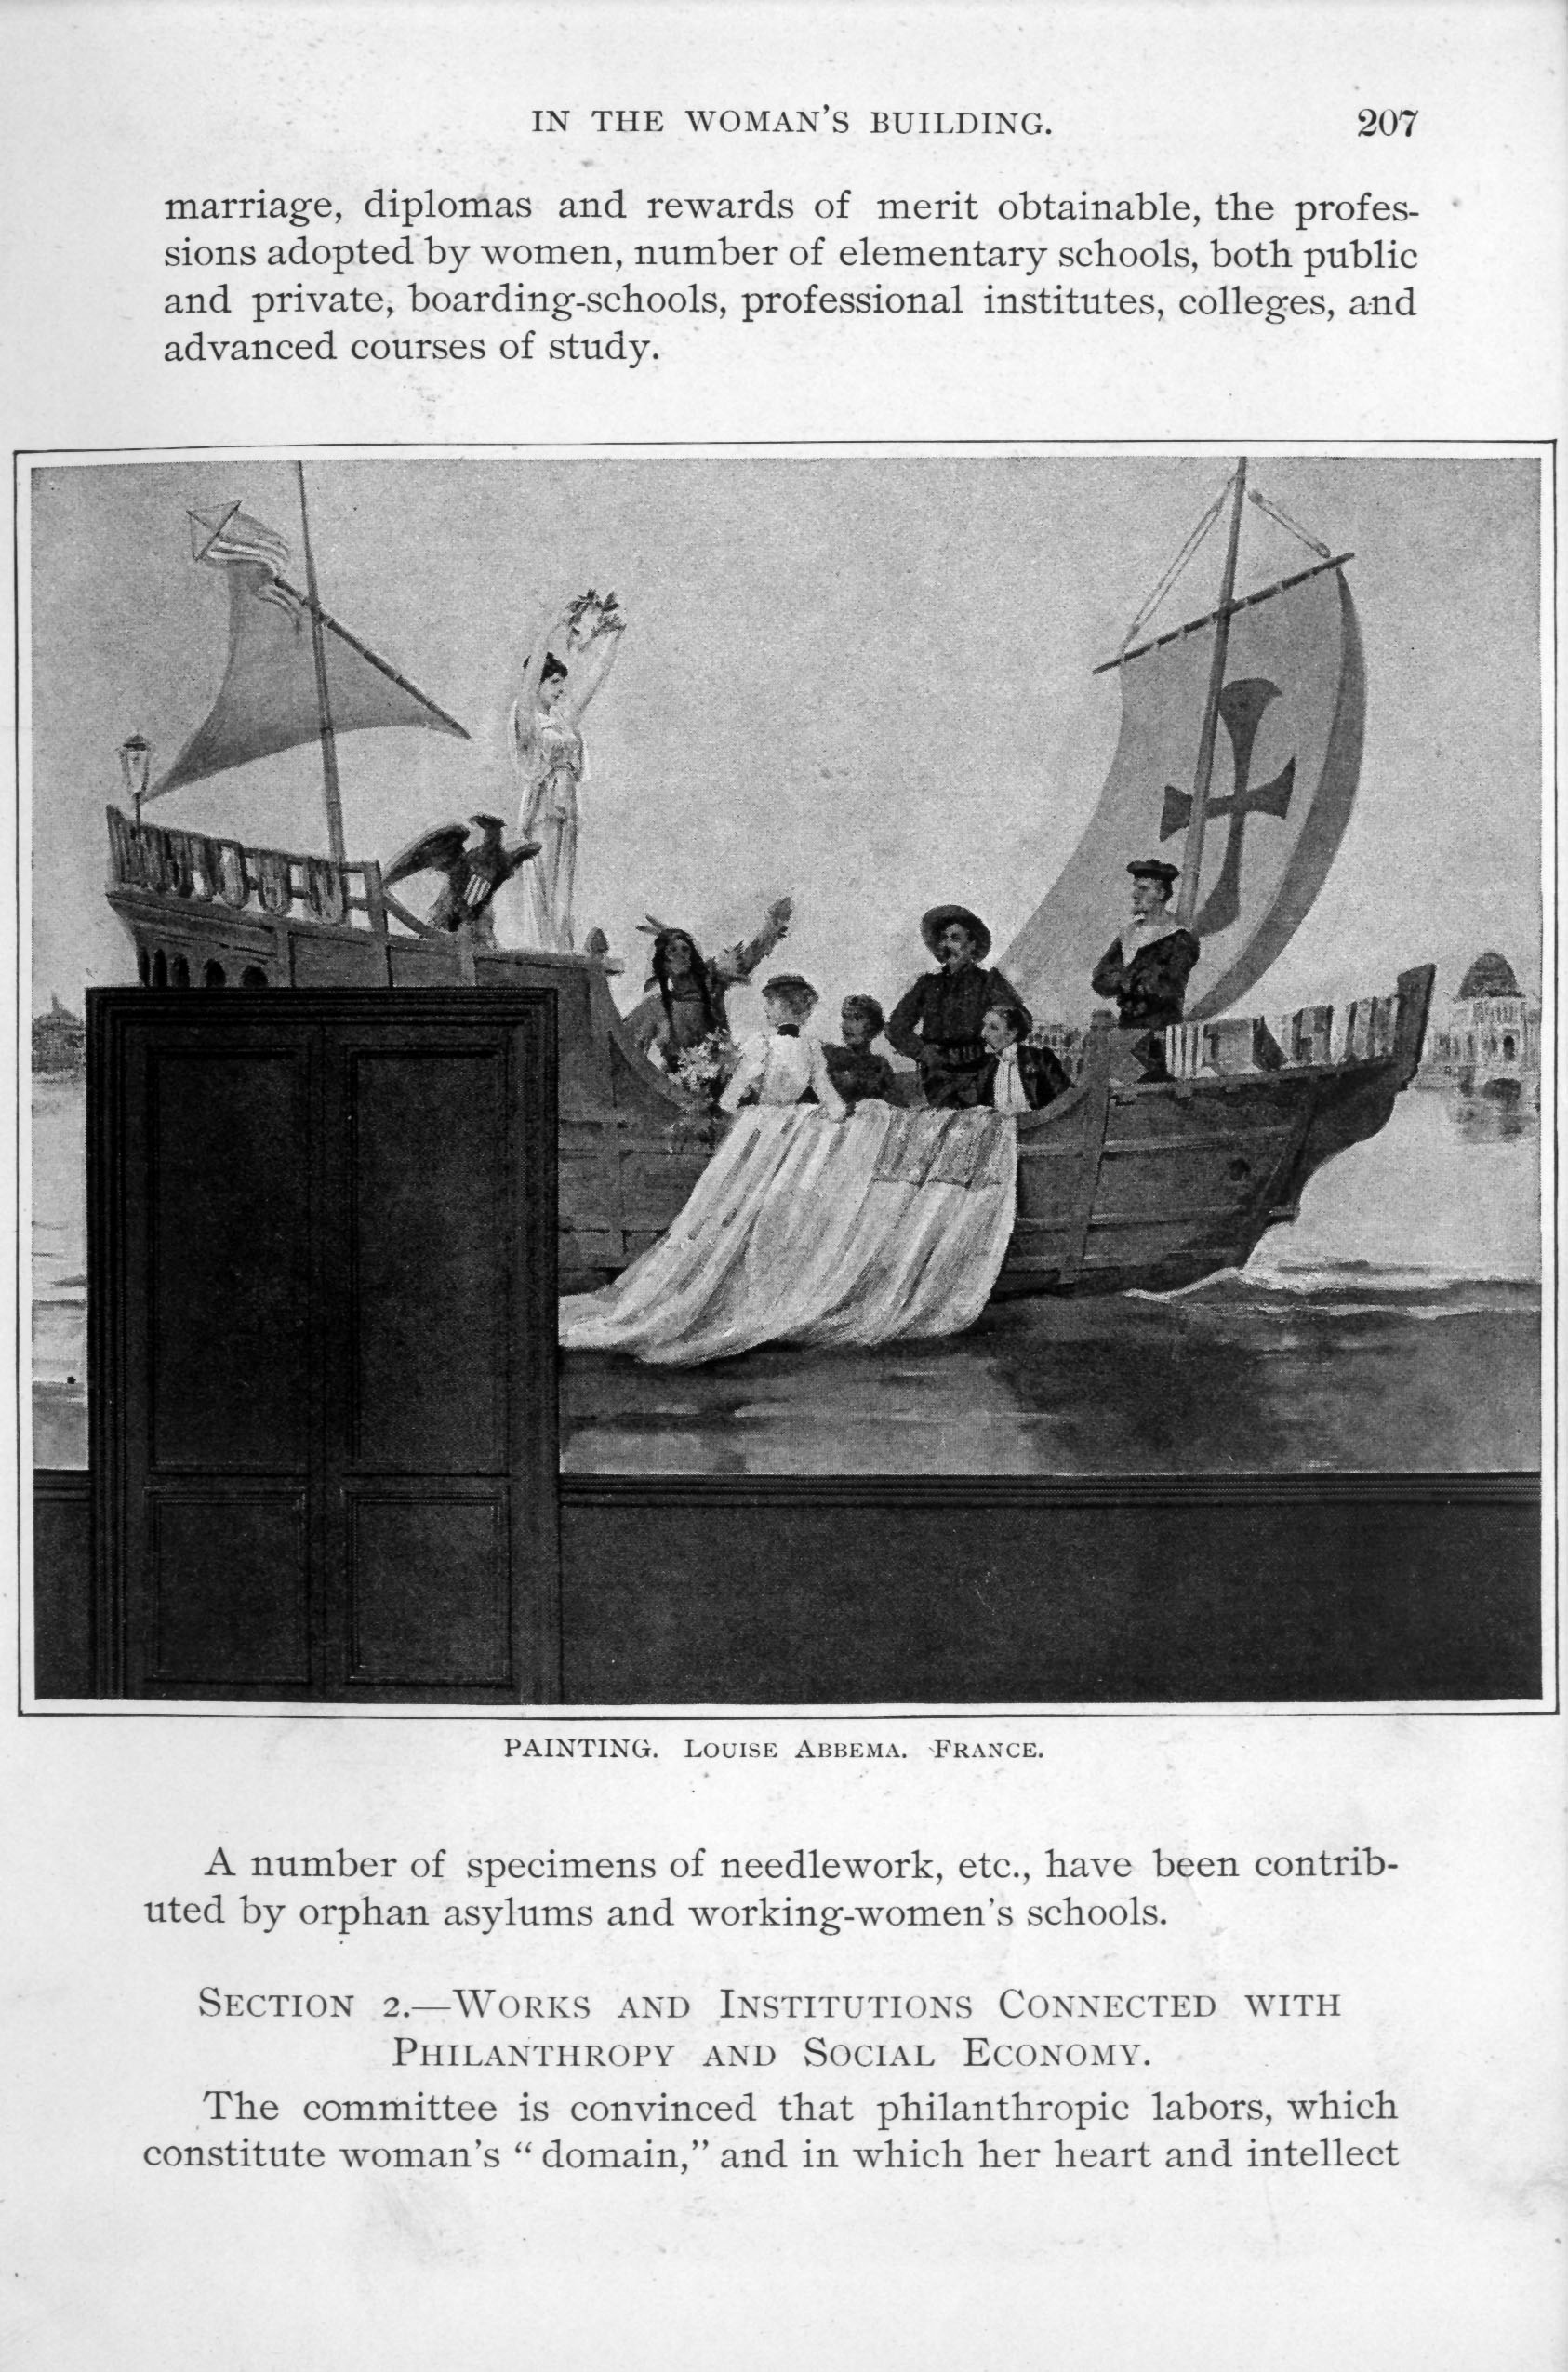 several men and women seated in a small boat with a sail, native american and woman holding up a laurel wreath are with them